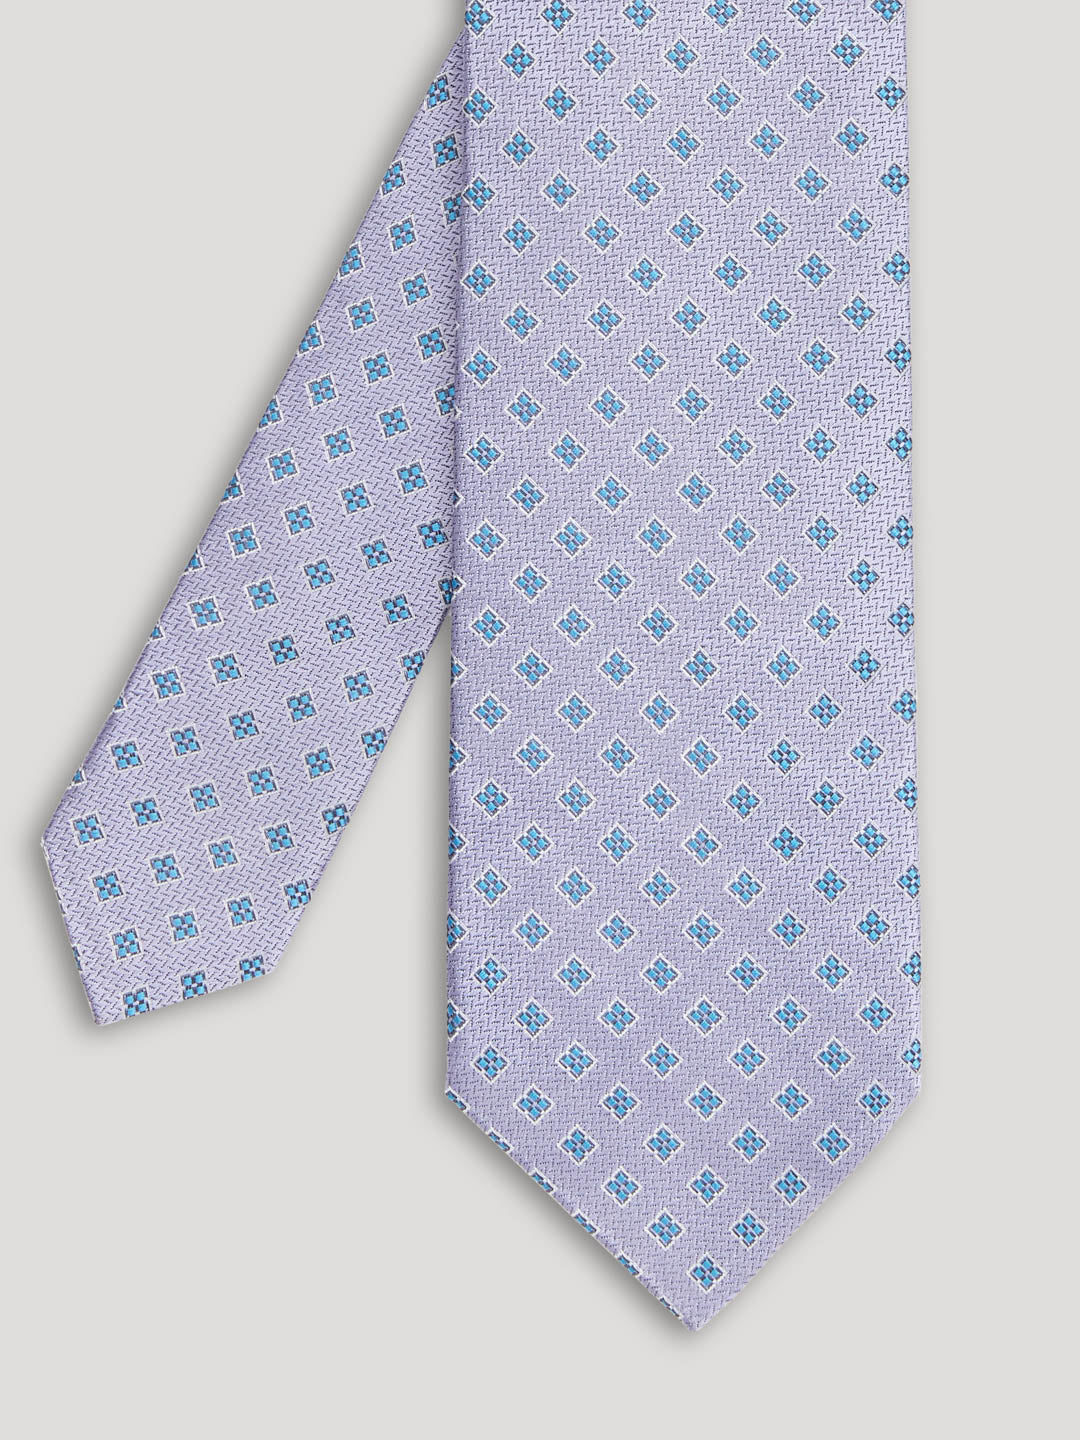 Purple and blue tie with large pattern